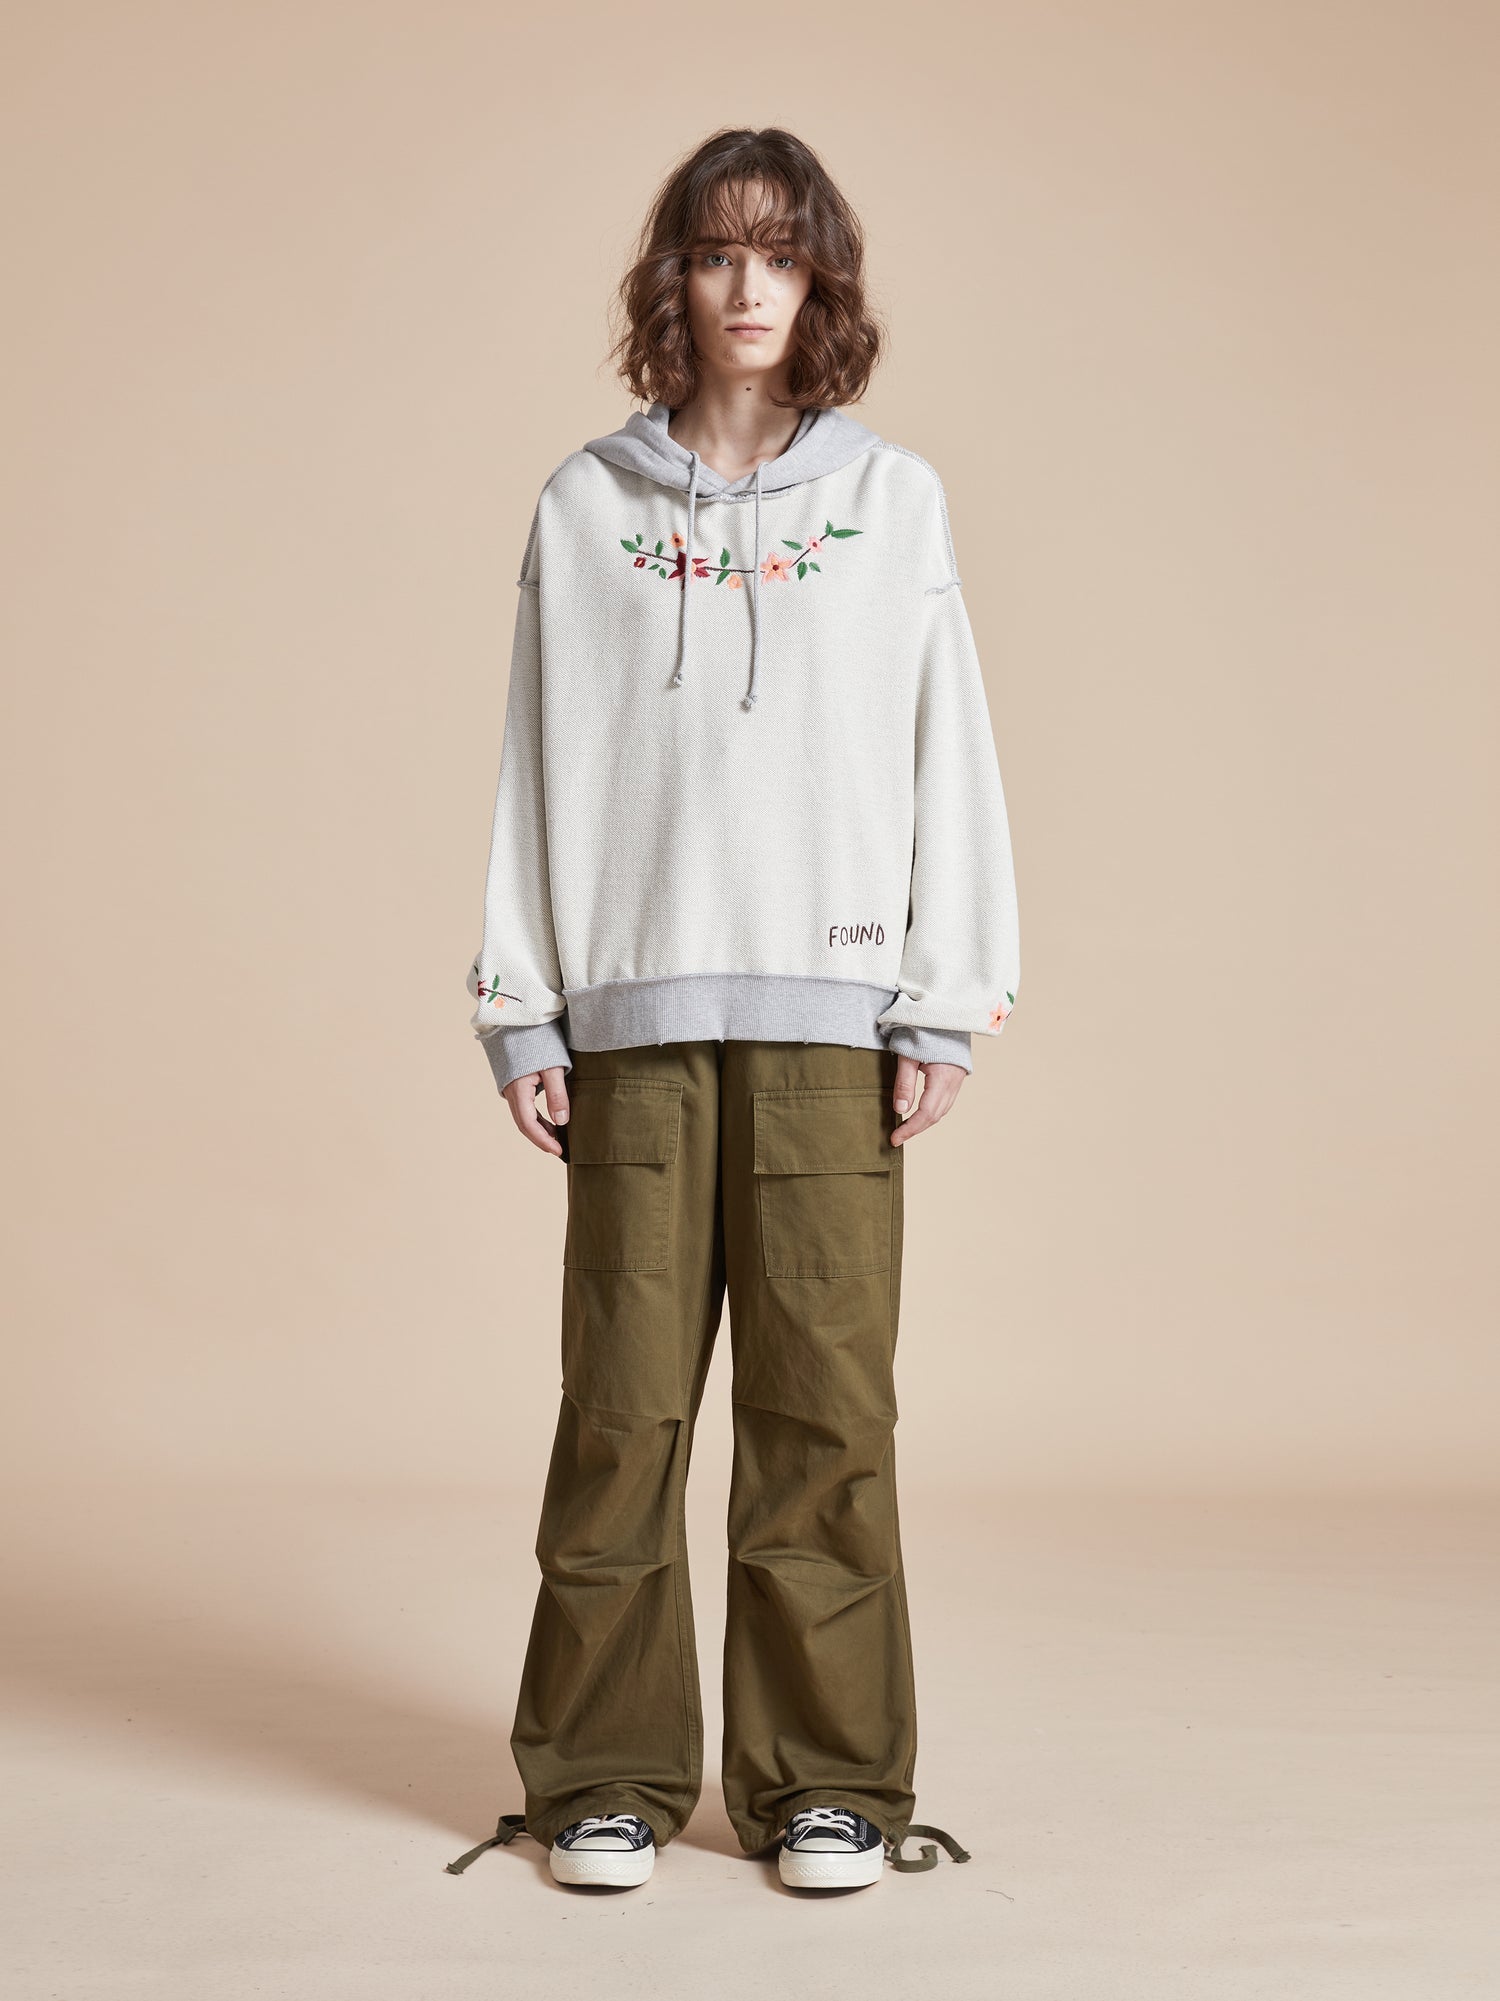 A woman wearing an Inverse Flower Petal Hoodie by Found and green pants.